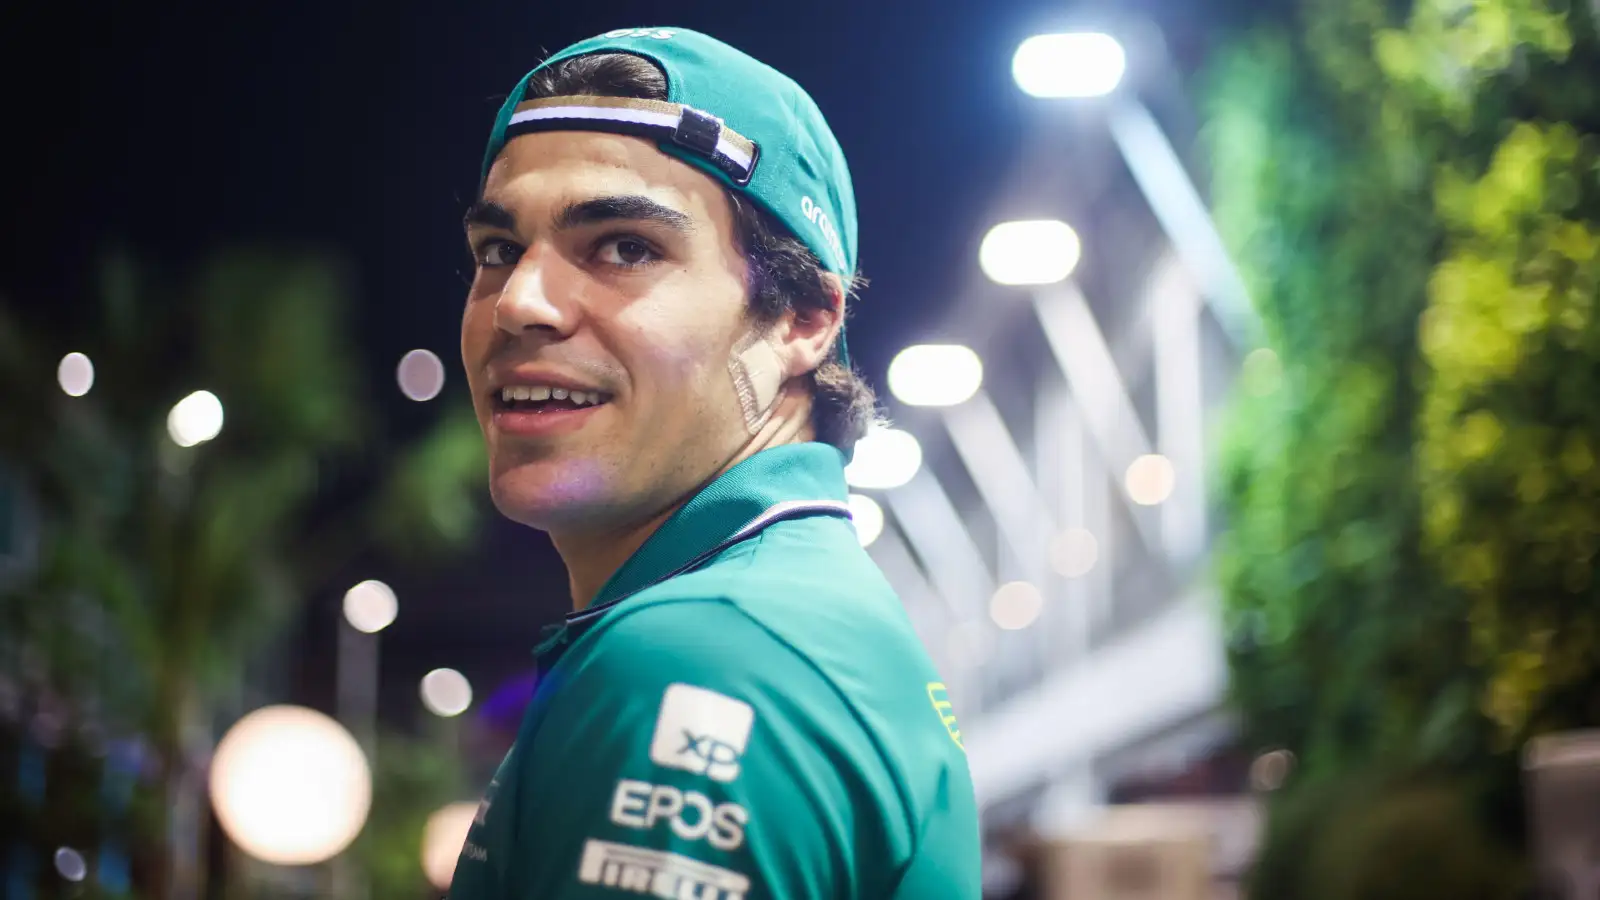 Aston Martin driver Lance Stroll, pictured during the Singapore Grand Prix weekend.